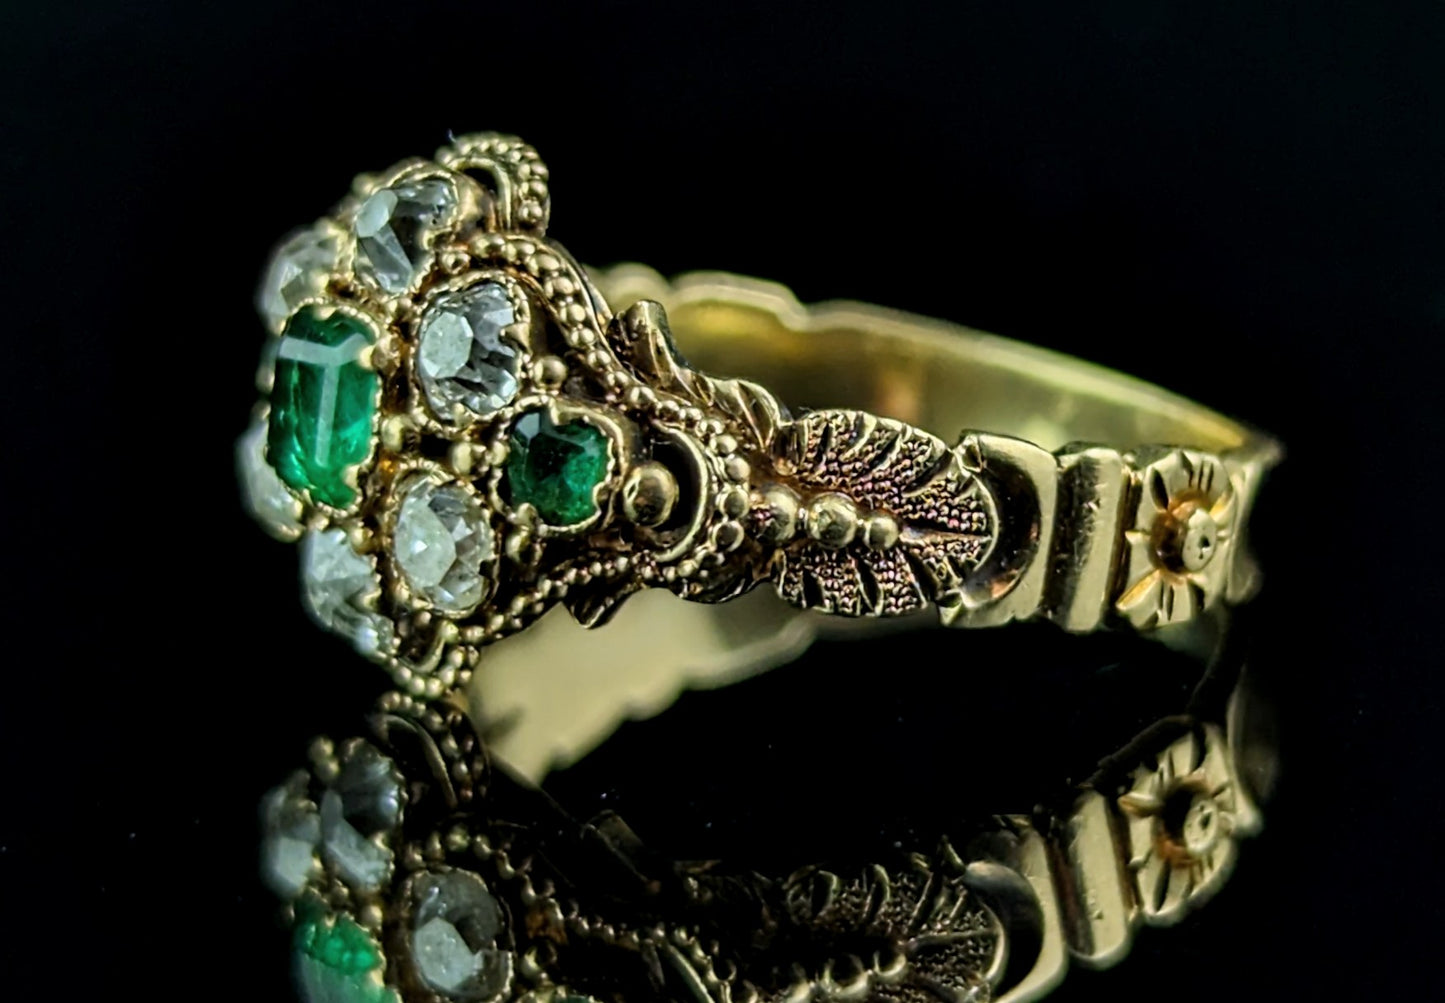 Antique Emerald and Diamond floral cluster ring, 18ct yellow gold